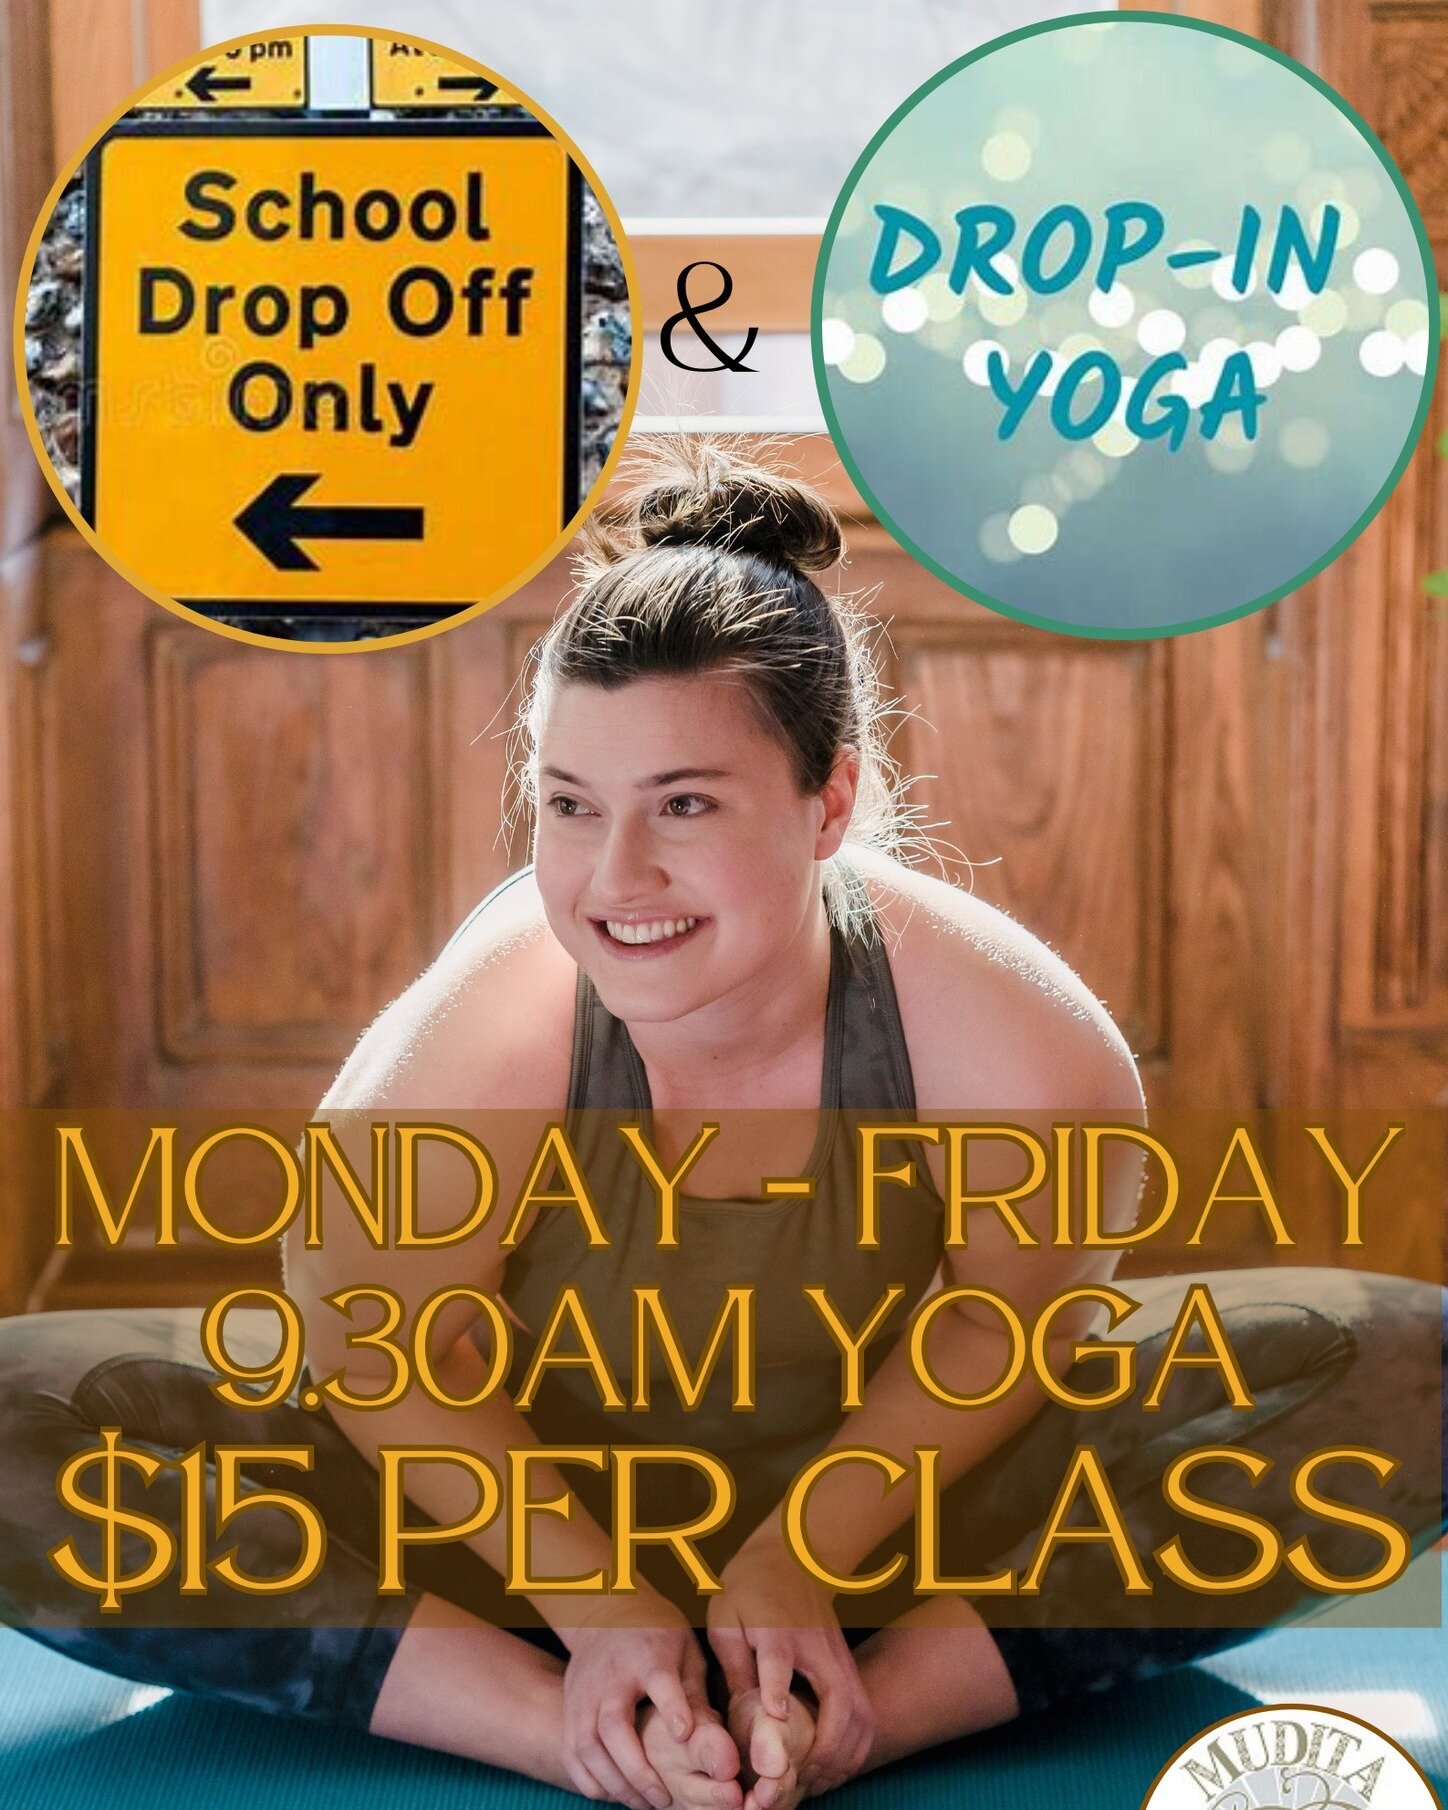 Hi All! This is an invite to mums &amp; dads to join a yoga class after school drop off. Monday - Friday only $15 per class. Small, friendly and inclusive studio. 😊#muditayogastudio #yoga #Mentone #baysideyoga🧘🏼&zwj;♀️ #baysidemelbourne #charmanro